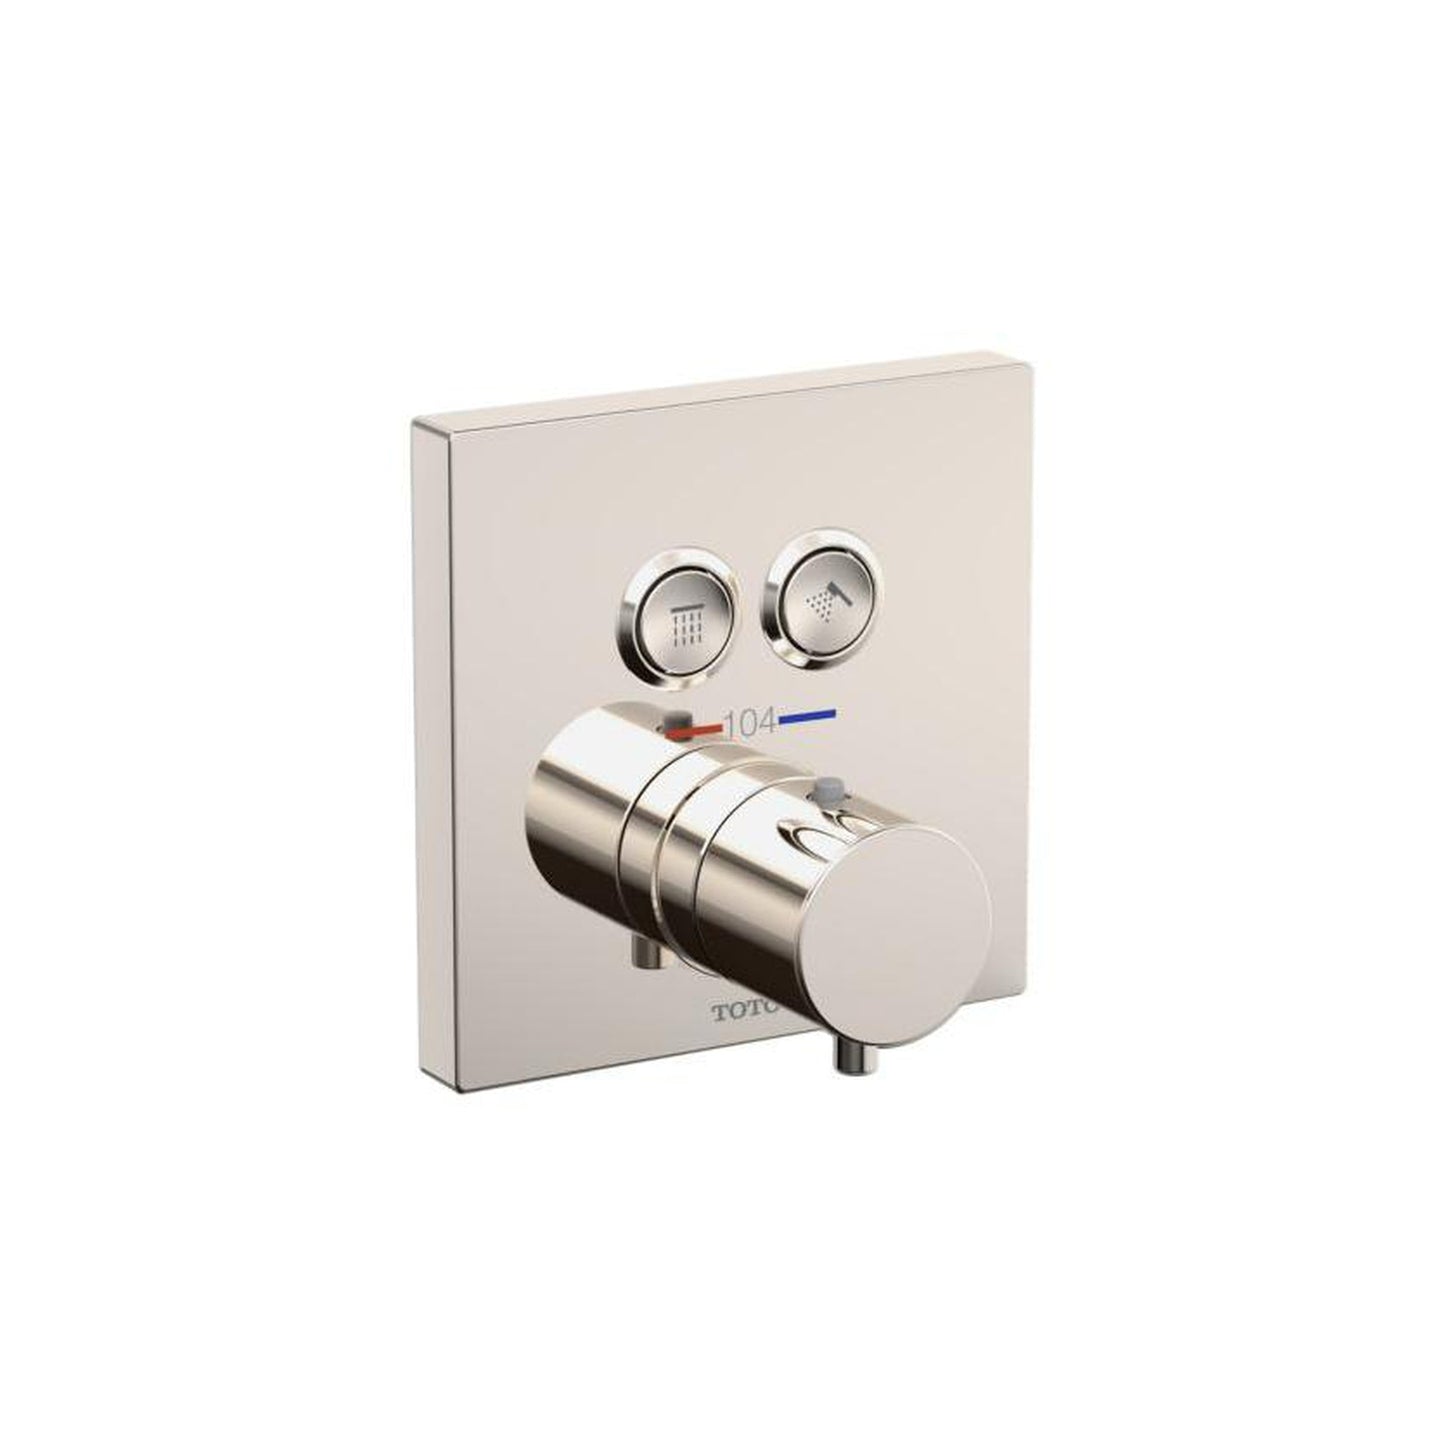 Toto Thermo 2WAY Polished Nickel Push Button Valve